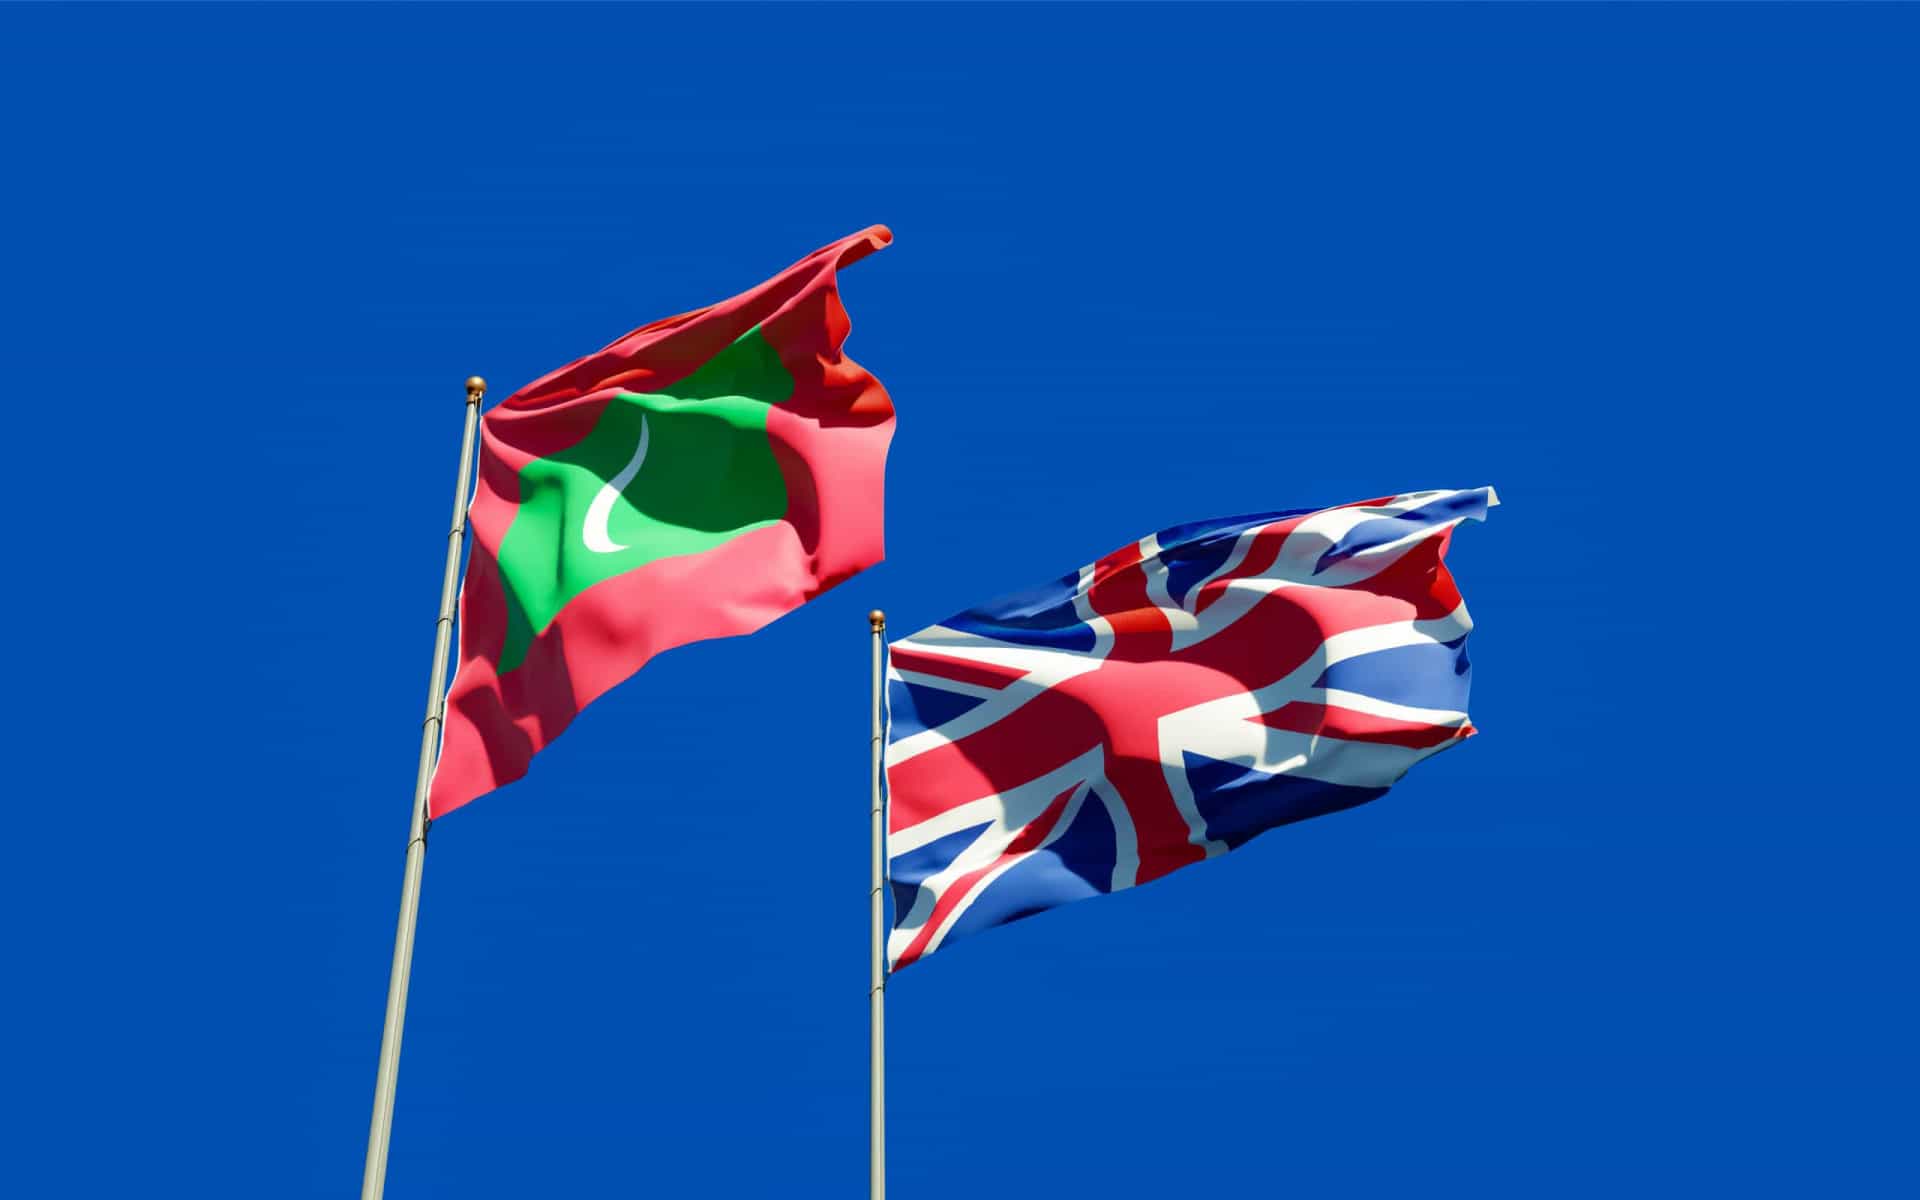 <p>Nevertheless, the Maldives were not rich for long after the shells ran out. The islands were a convenient trading stop for larger powers. They have passed through Portuguese, Dutch, and British hands. Independence was only gained in 1965.</p>